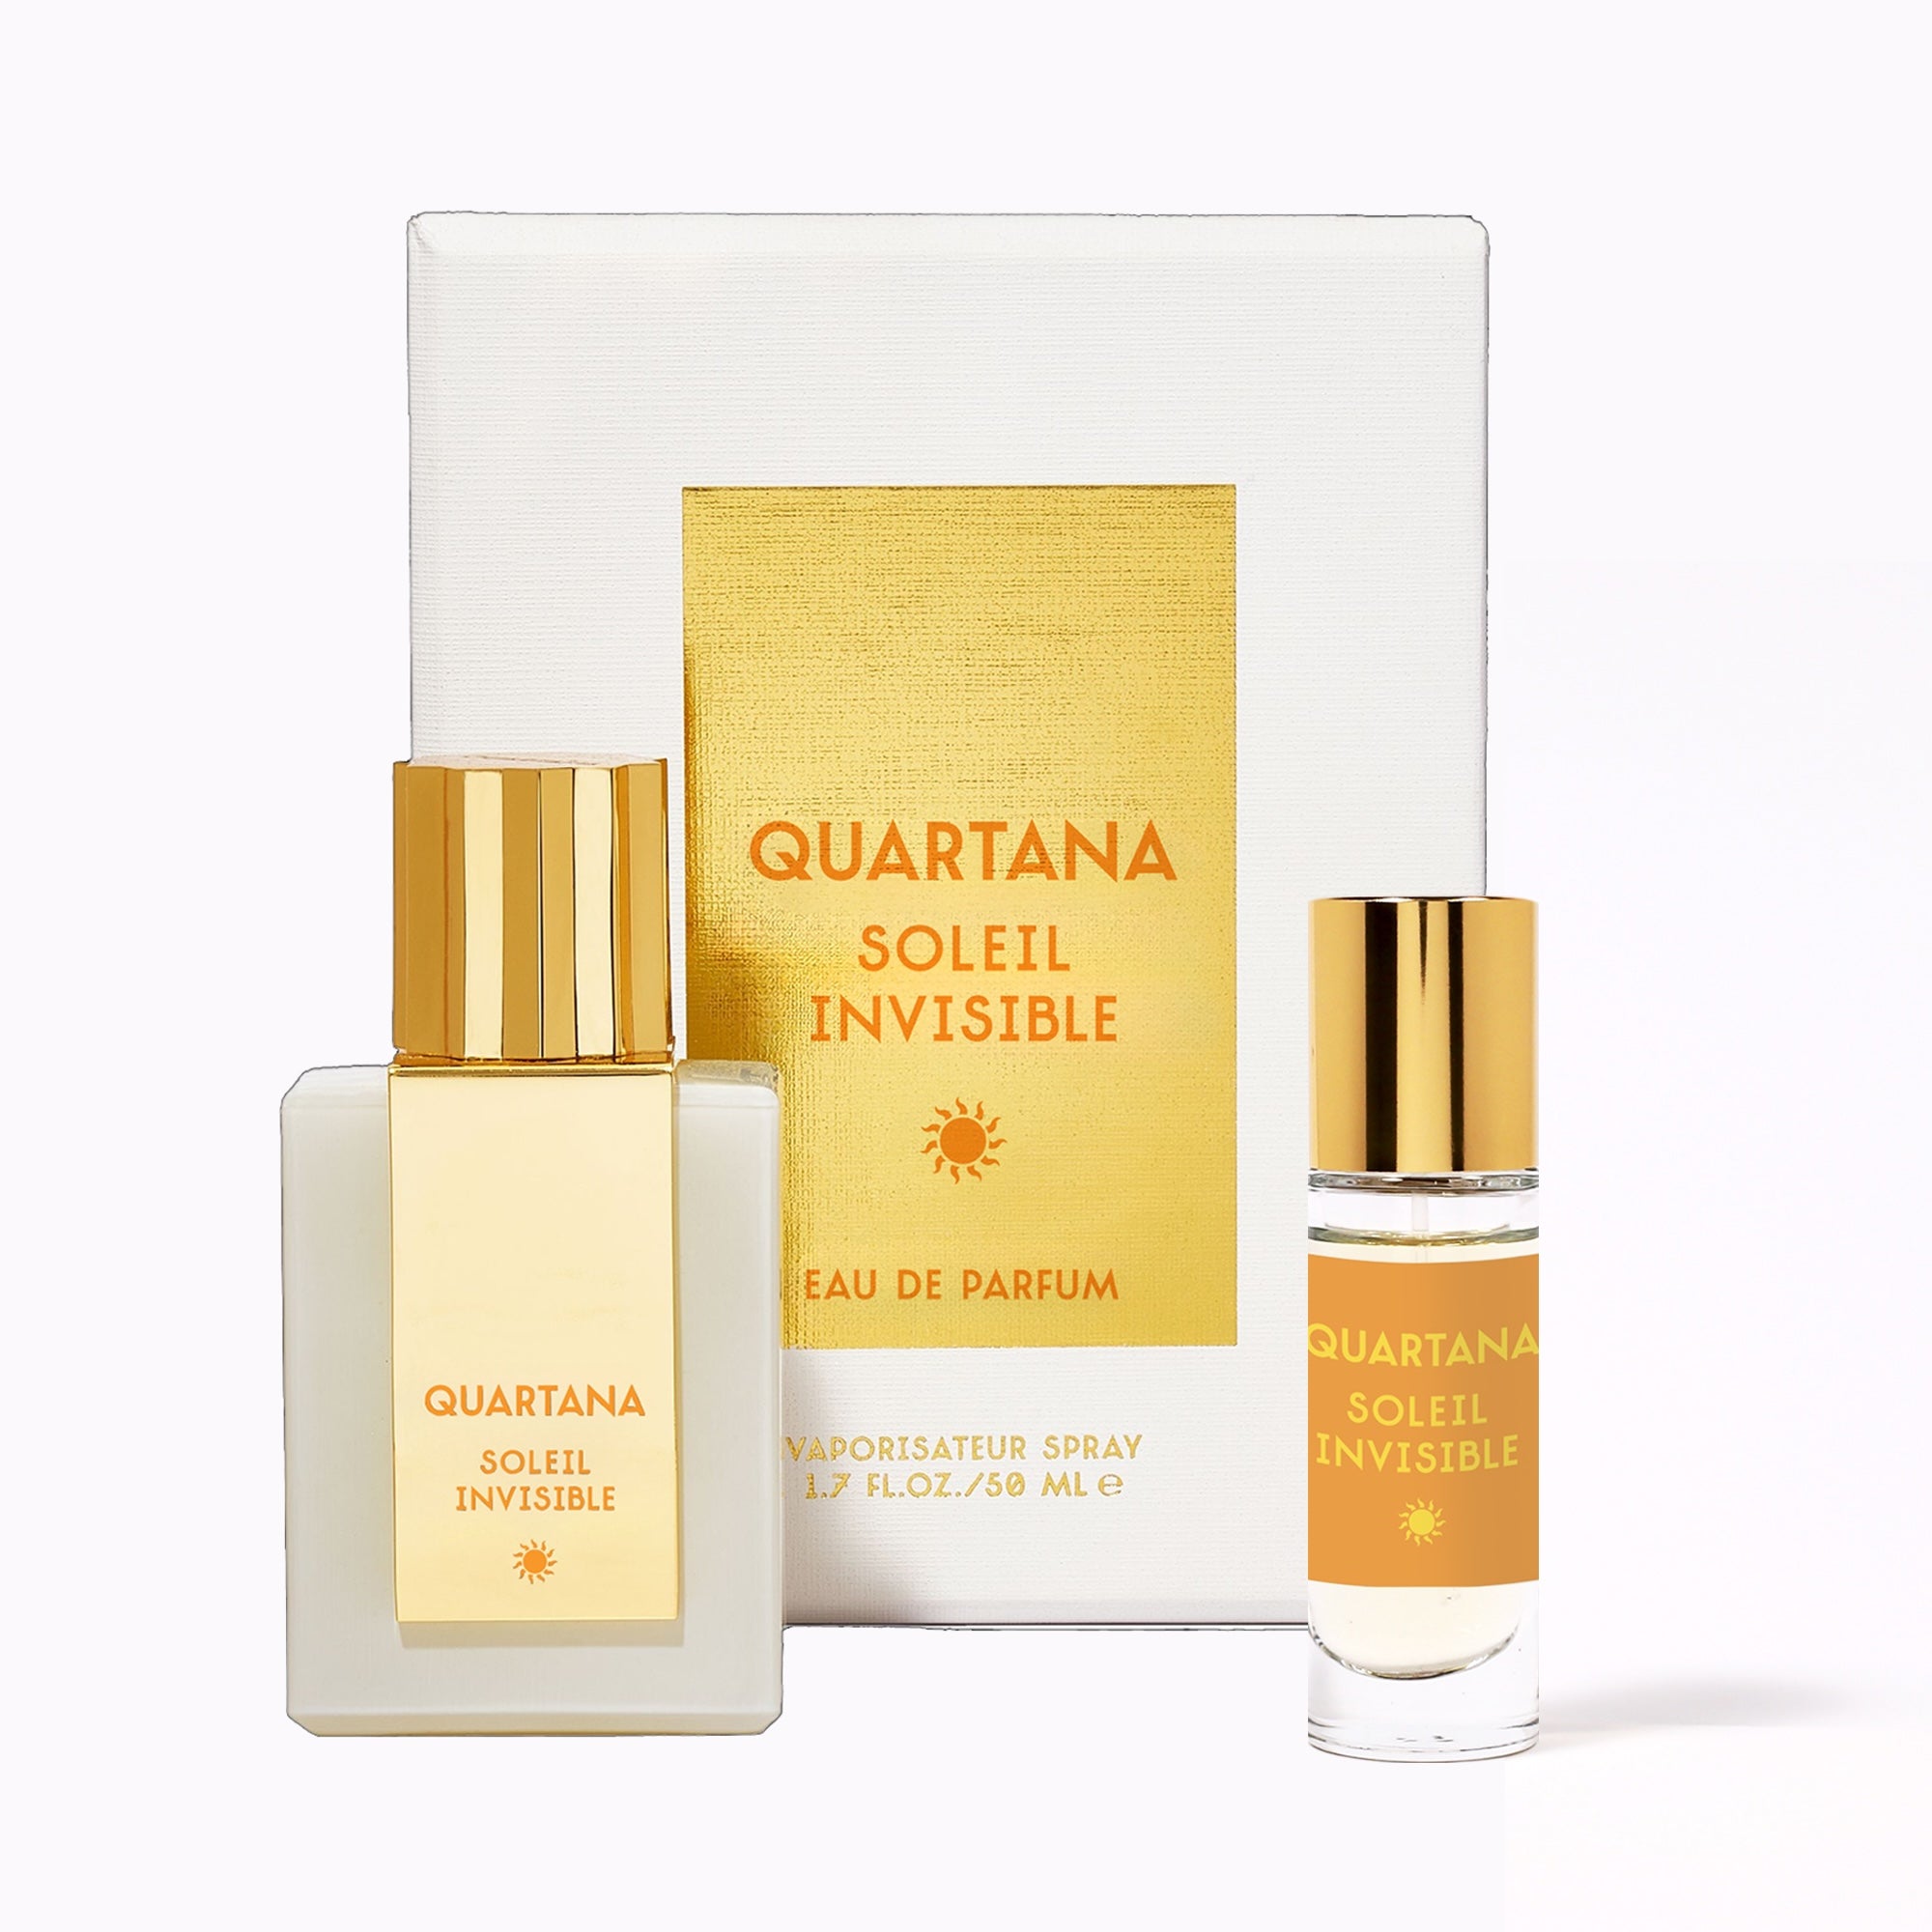 Soleil Invisible Pre-Order Bundle (50mL + Complimentary 10mL)